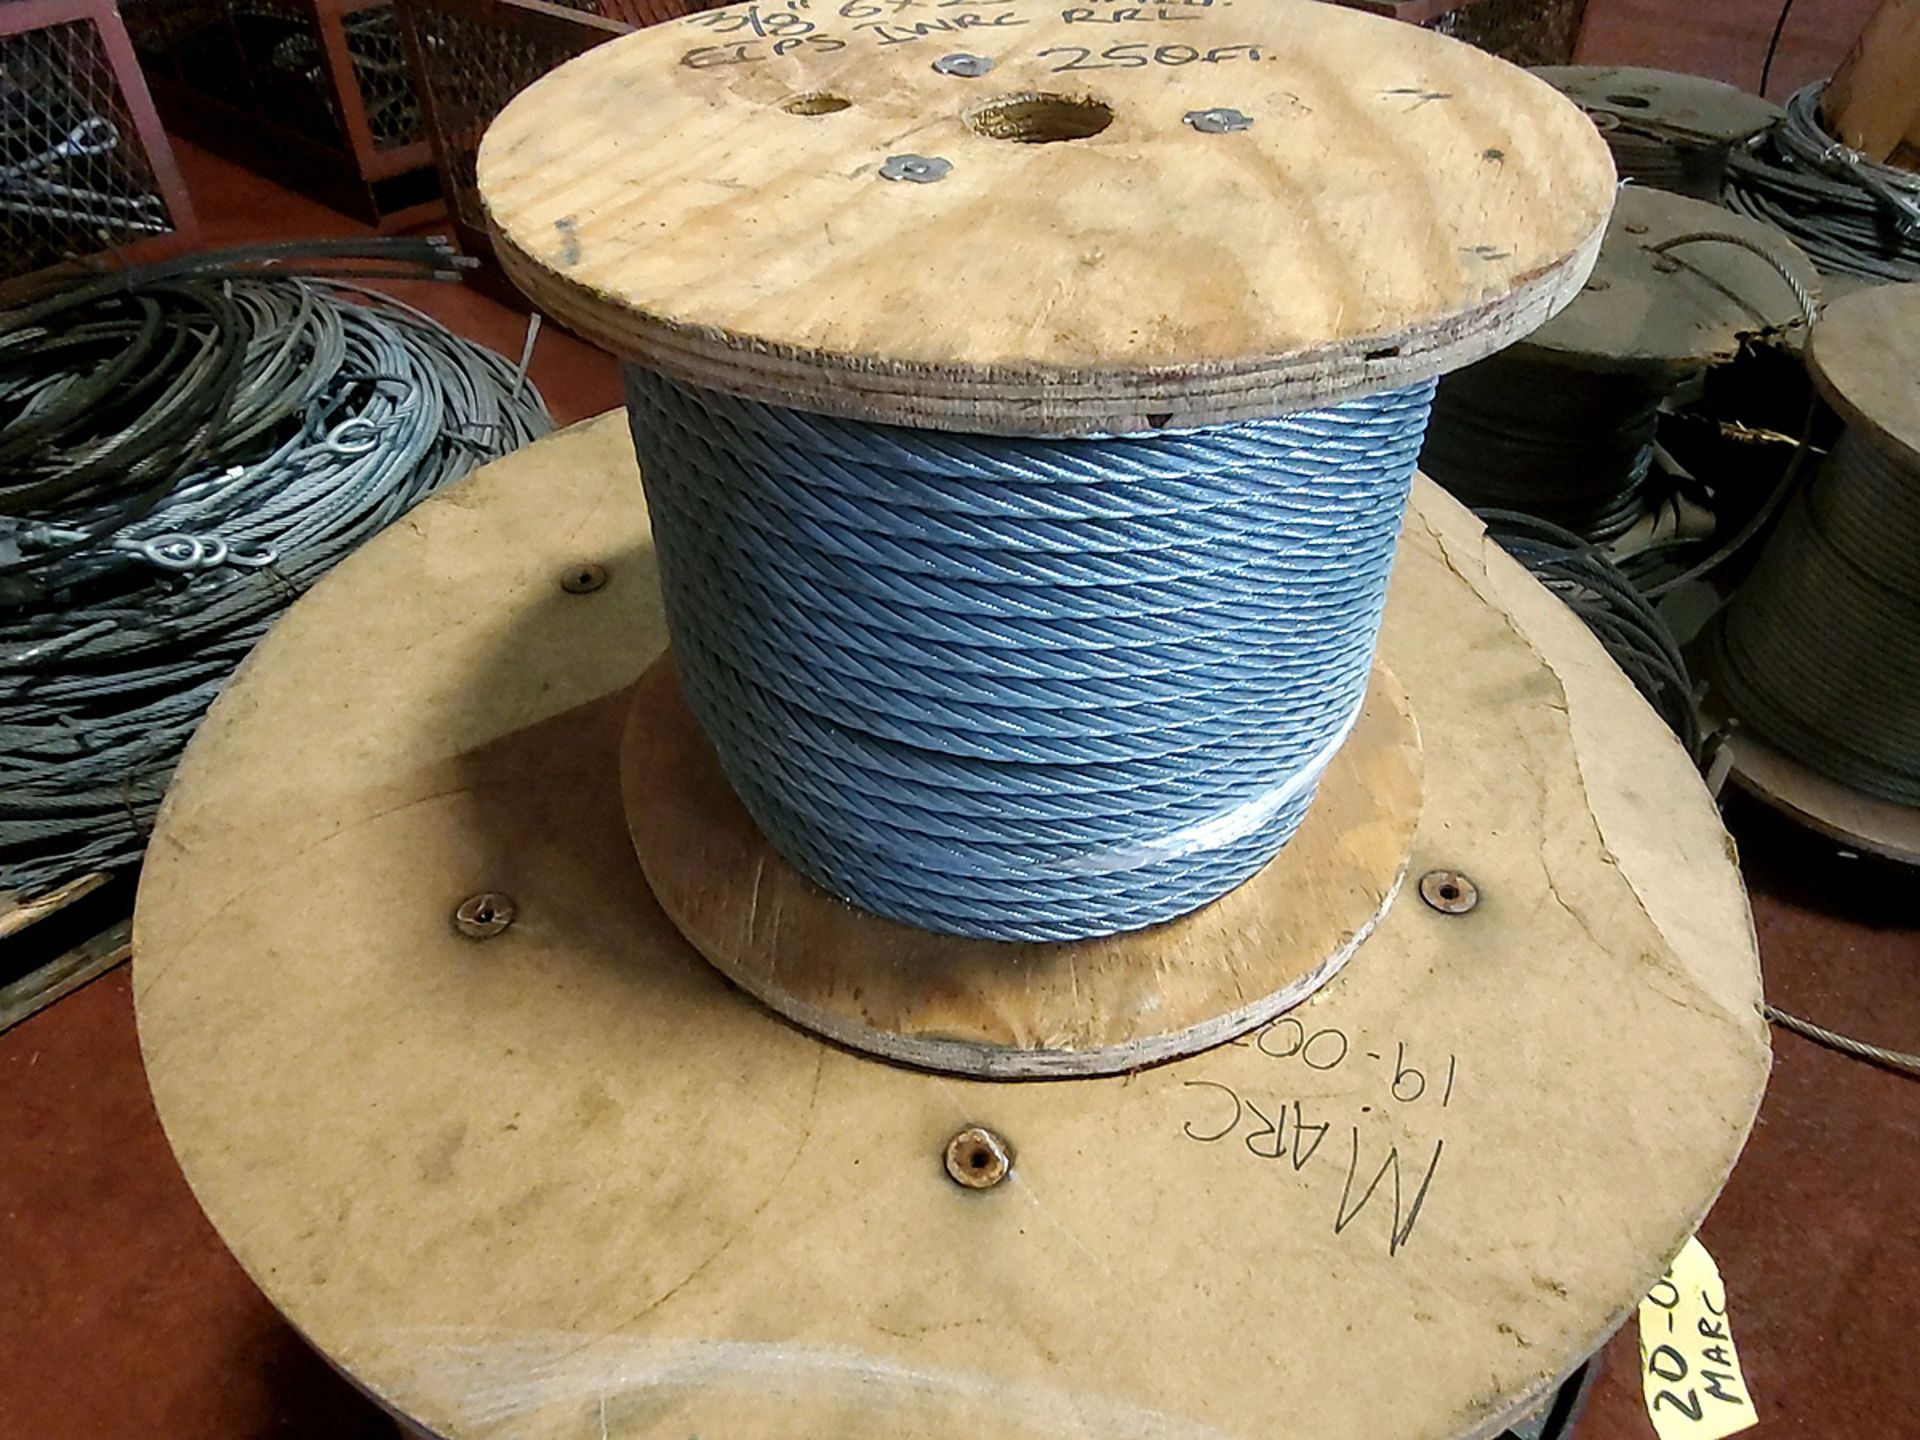 A Group of Braided Cable Spools on Pallet - Image 3 of 3